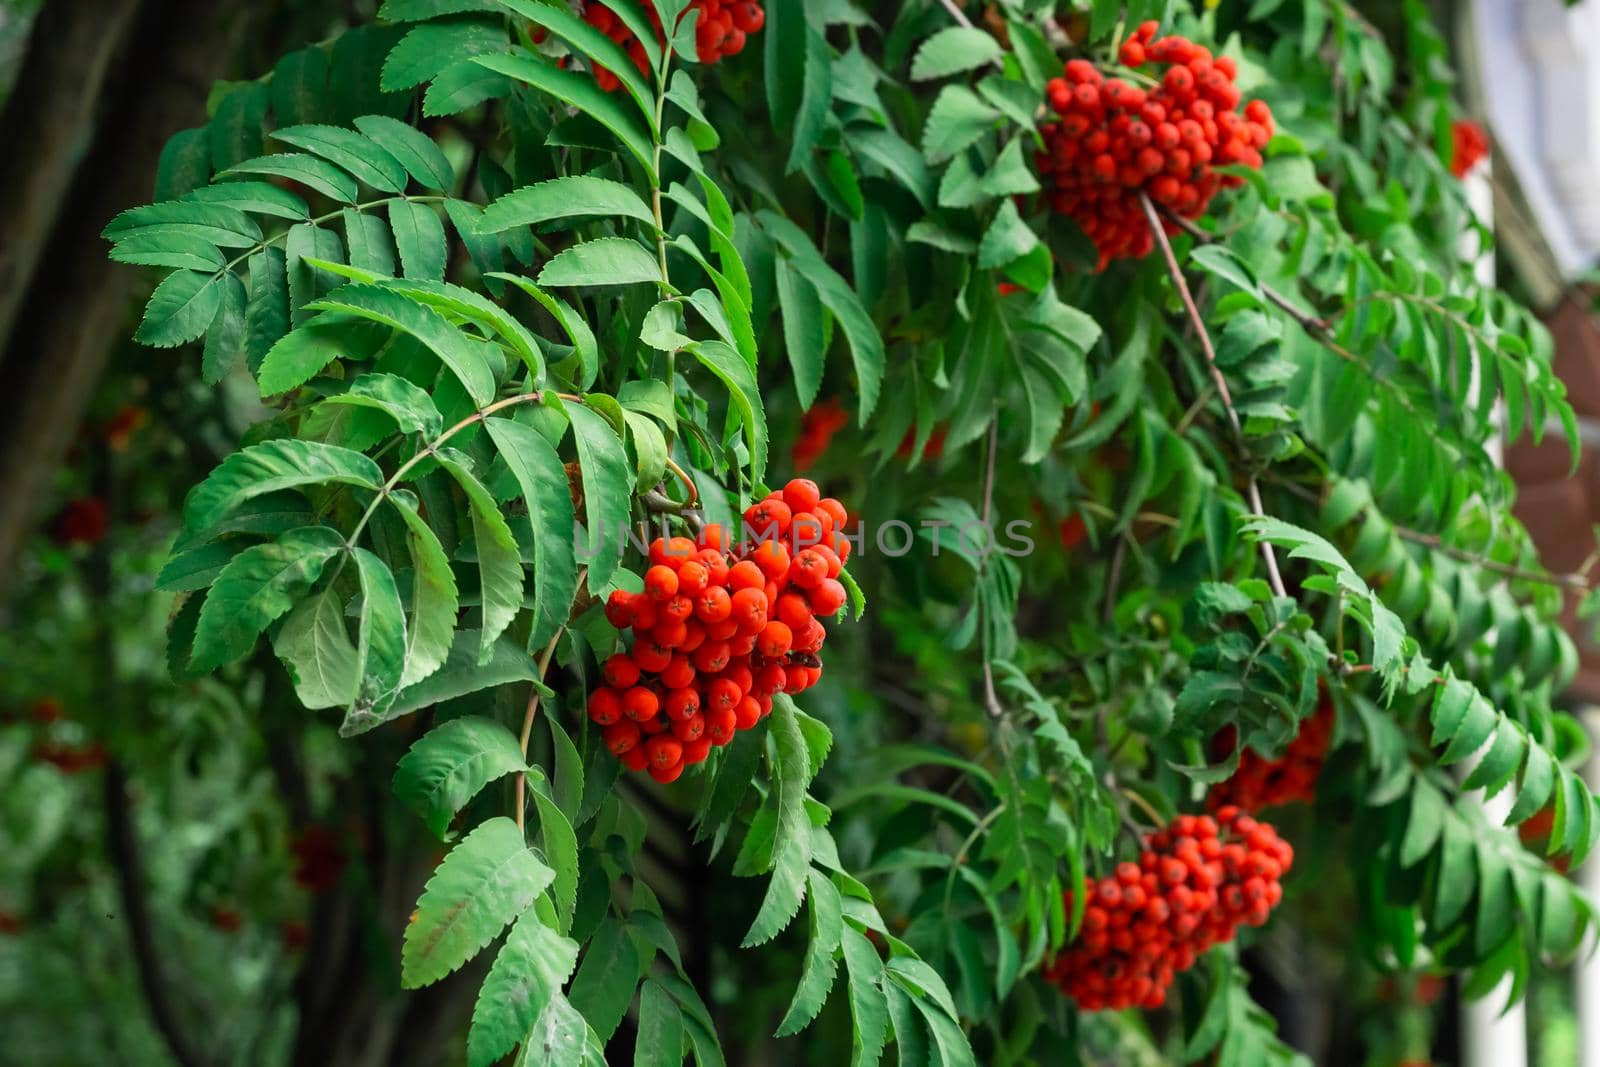 Bunches of ripe red Mountain Ash berries on branches with green leaves, rowan trees in summer autumn garden, close up